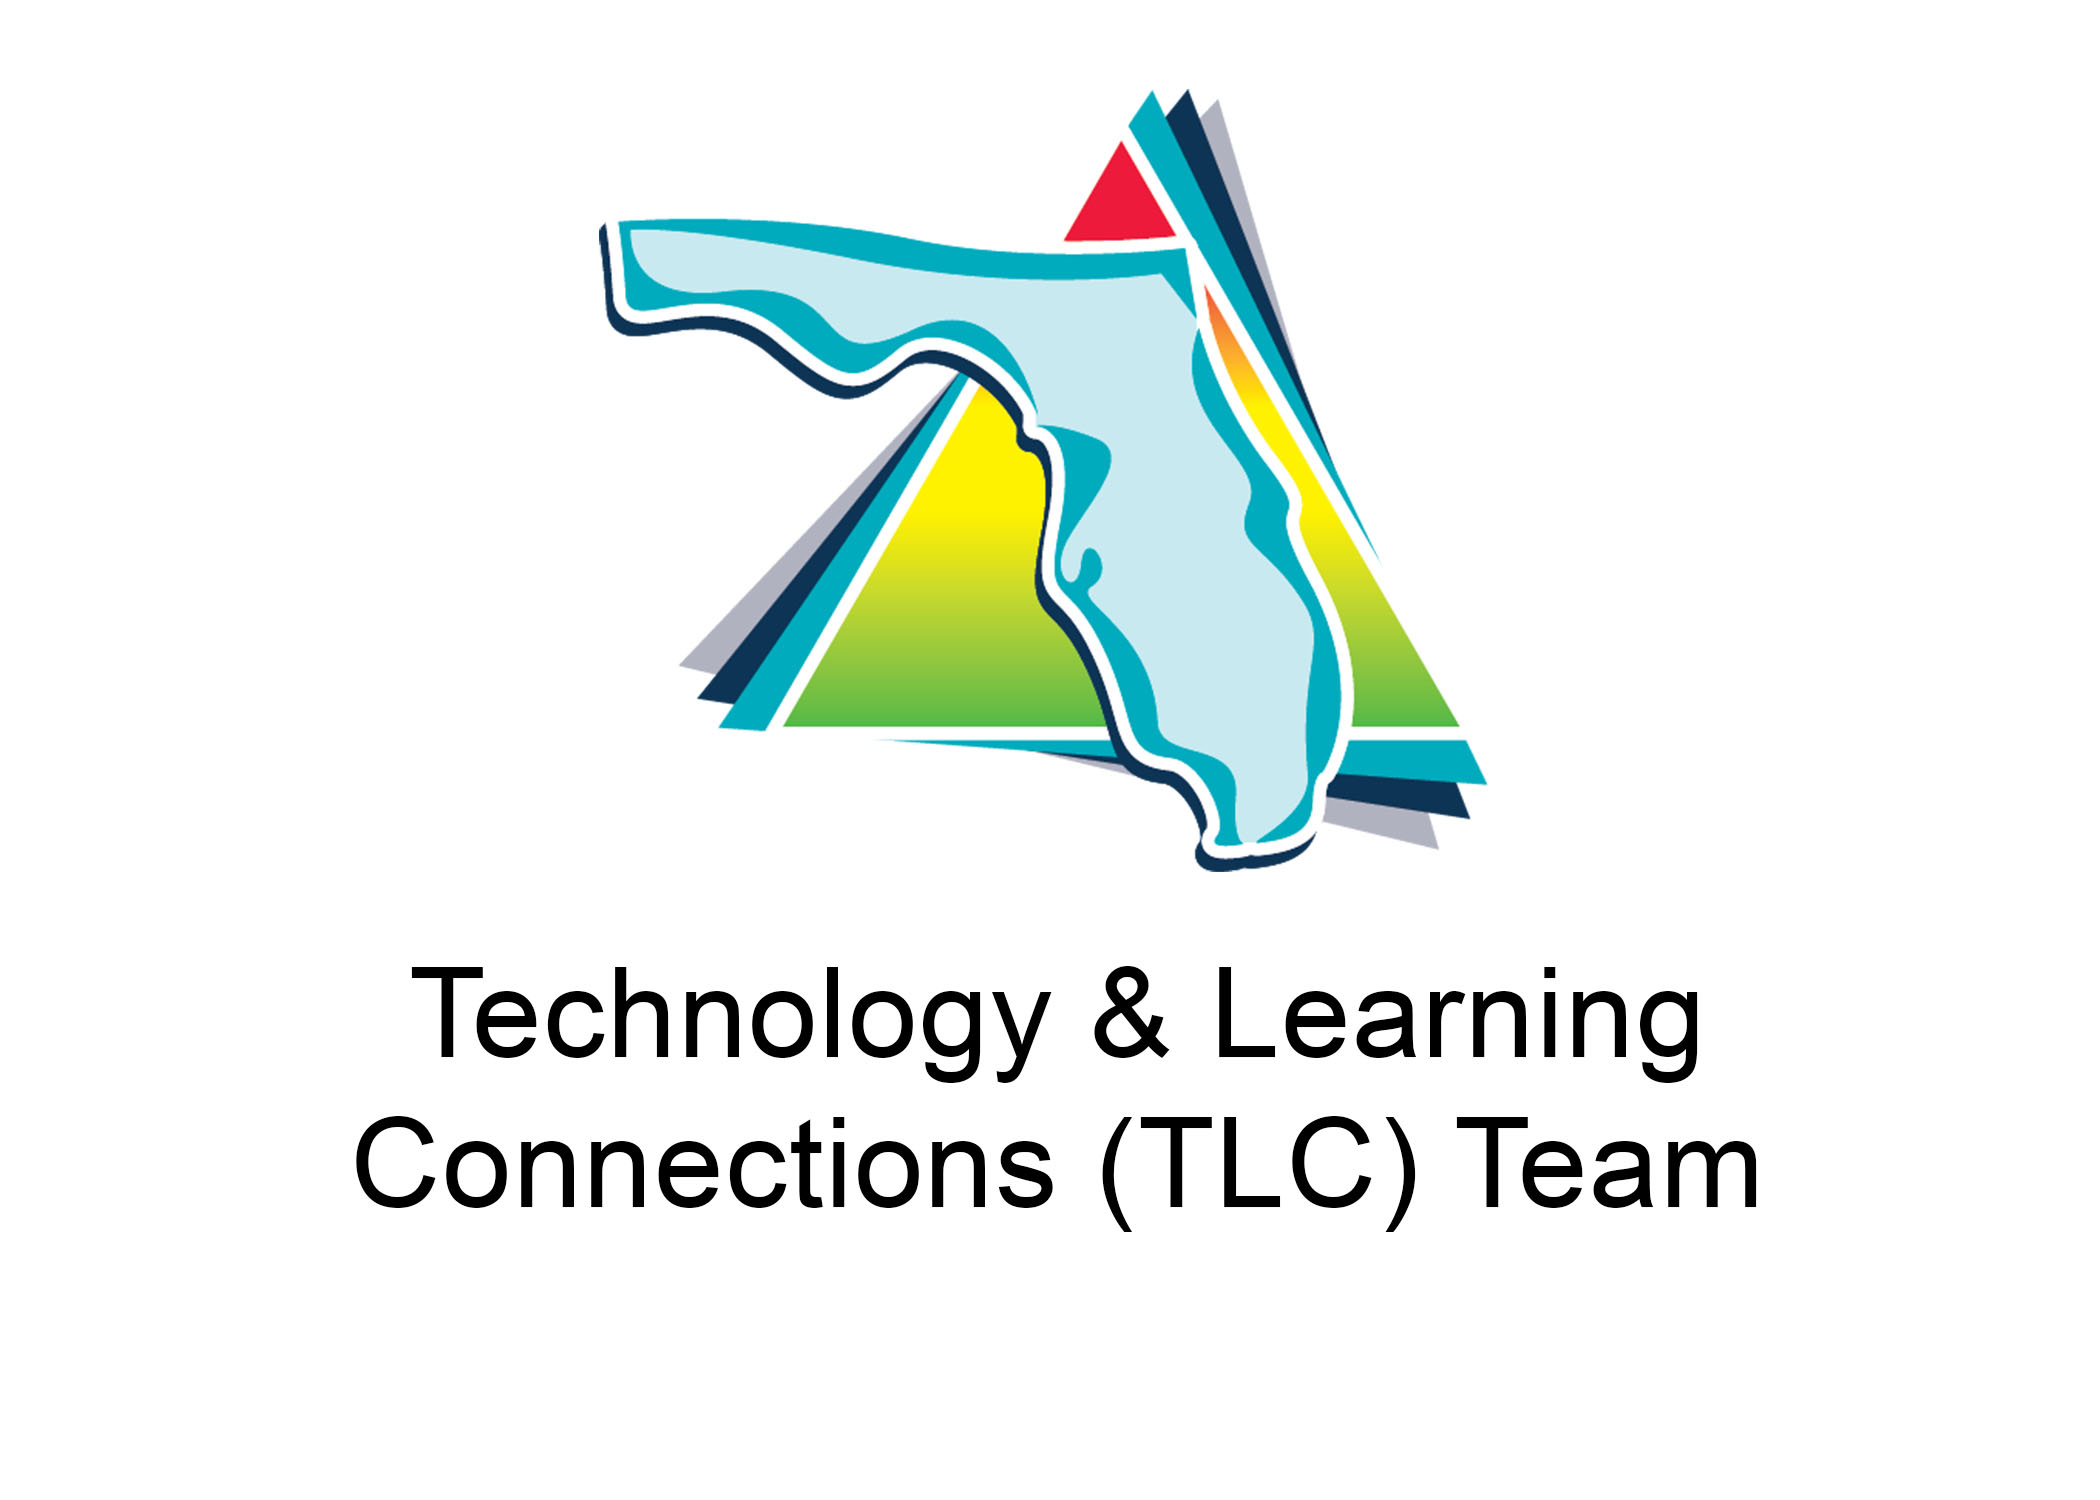 Technology & Learning Connections (TLC) Team